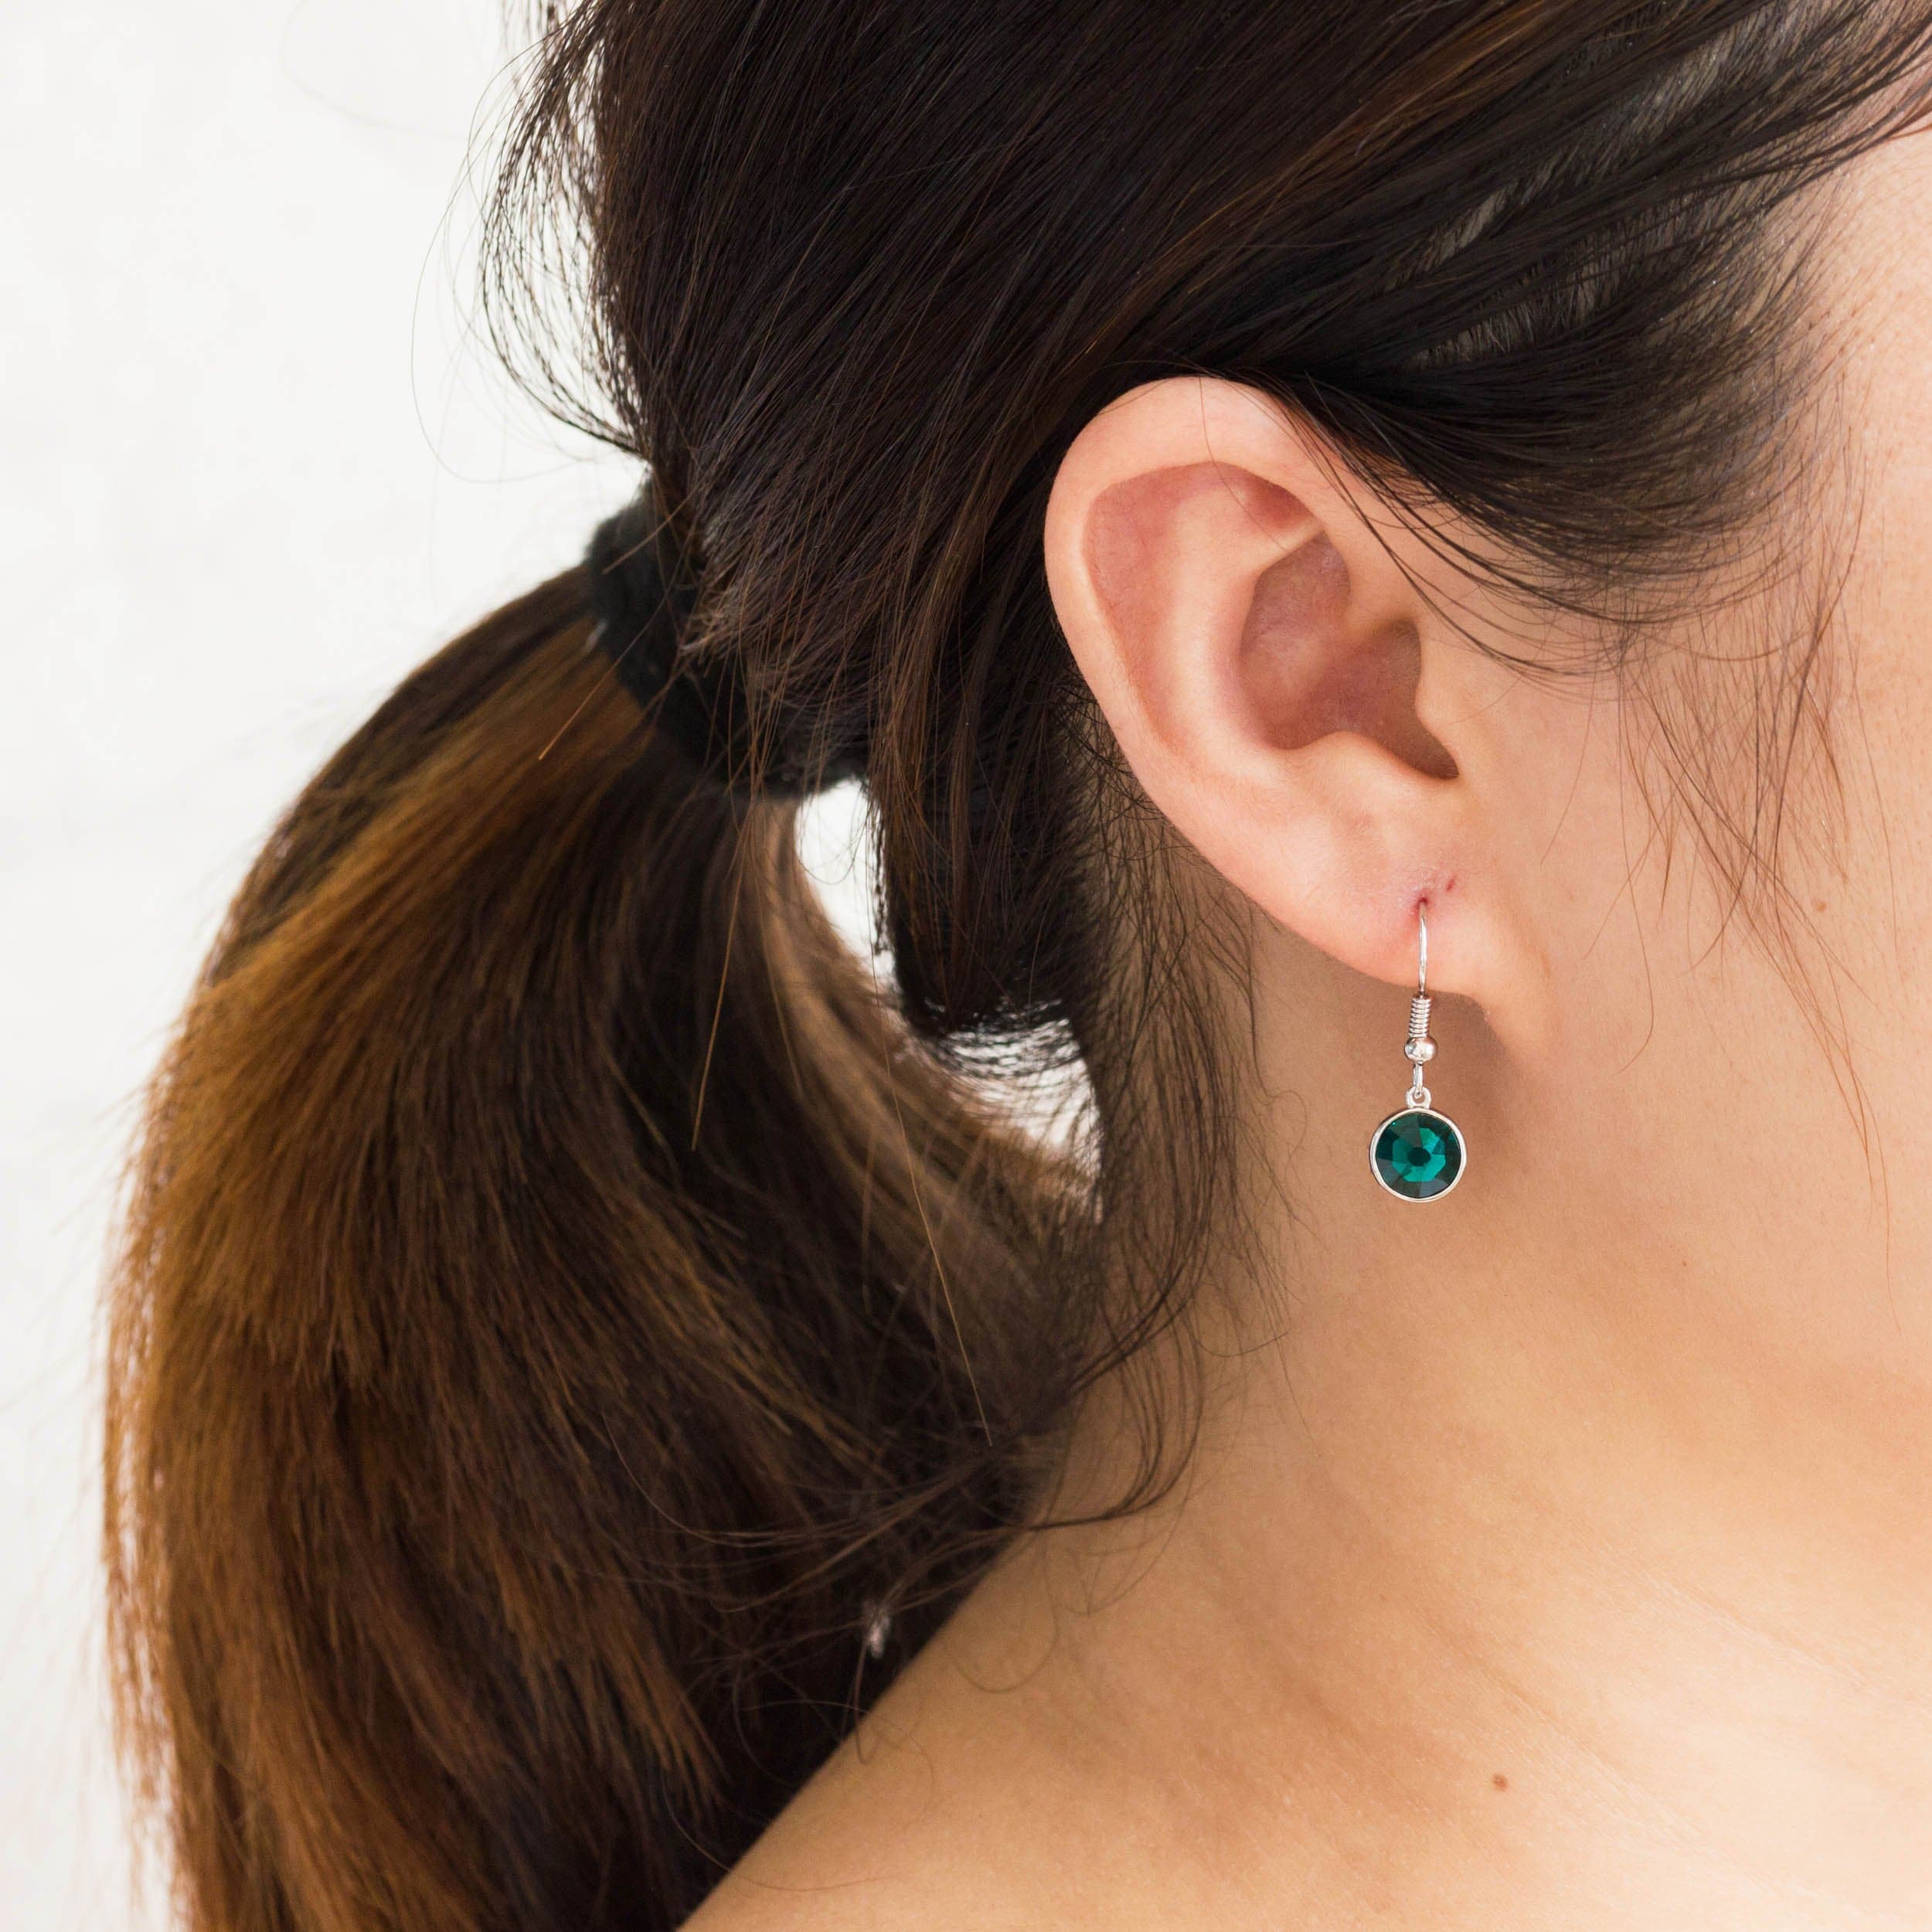 May Birthstone Drop Earrings Created with Emerald Zircondia® Crystals